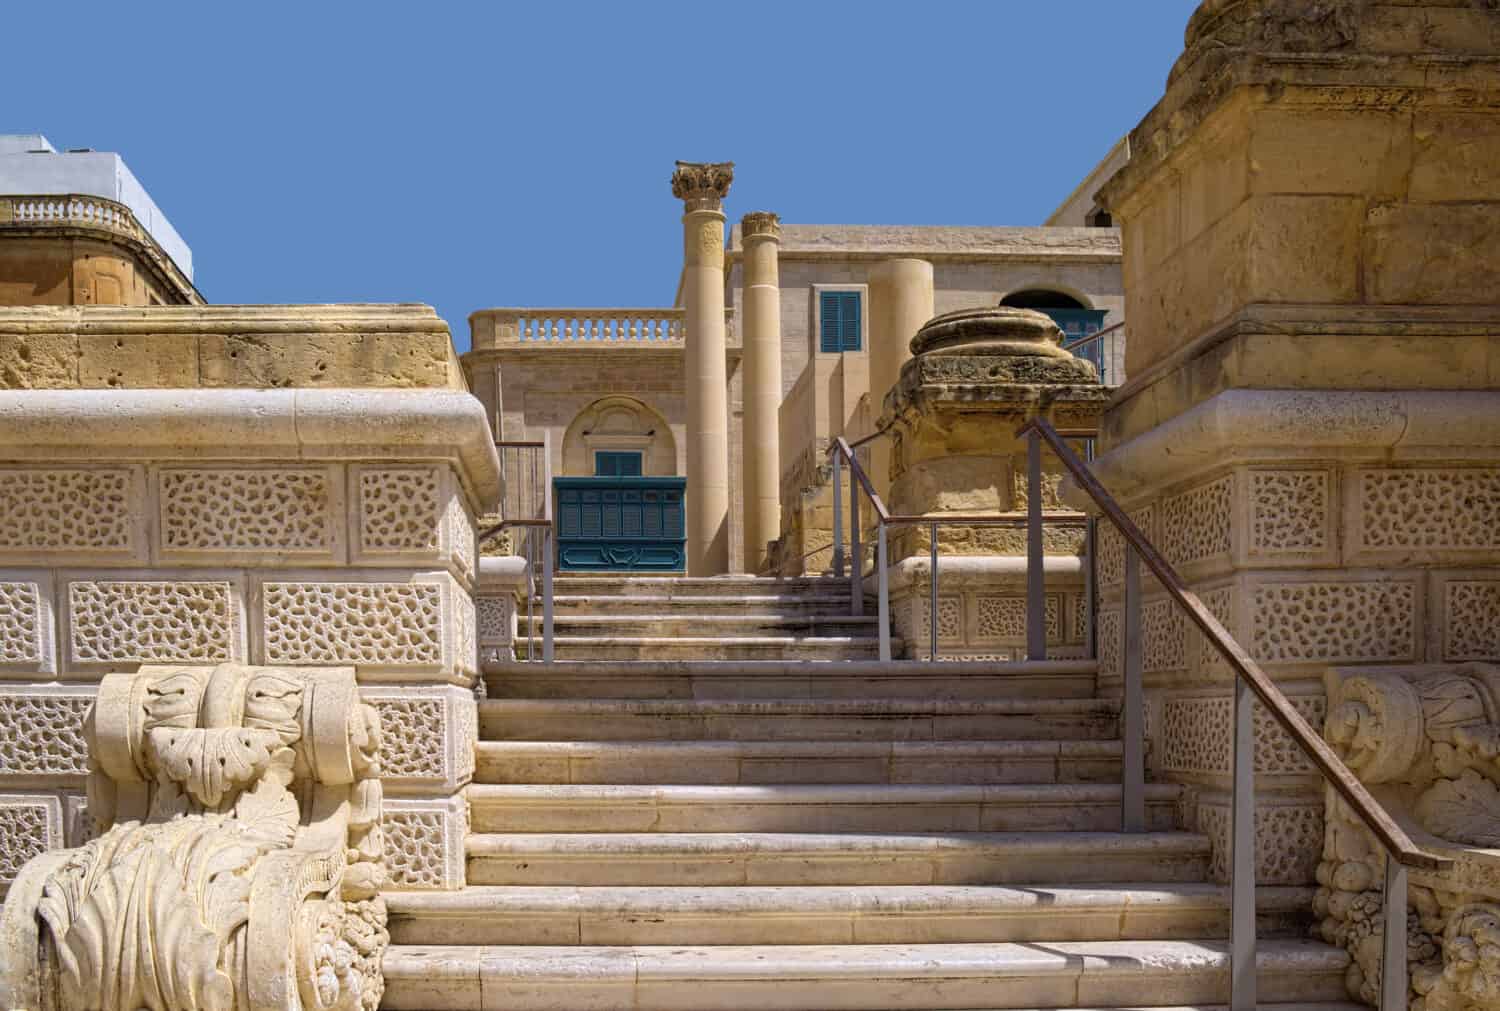 Stone staircase, columns and other architectural fragments of ruined Royal Opera House in the historic part of Valletta, Malta. All stones has typical Maltese yellowish coloring.